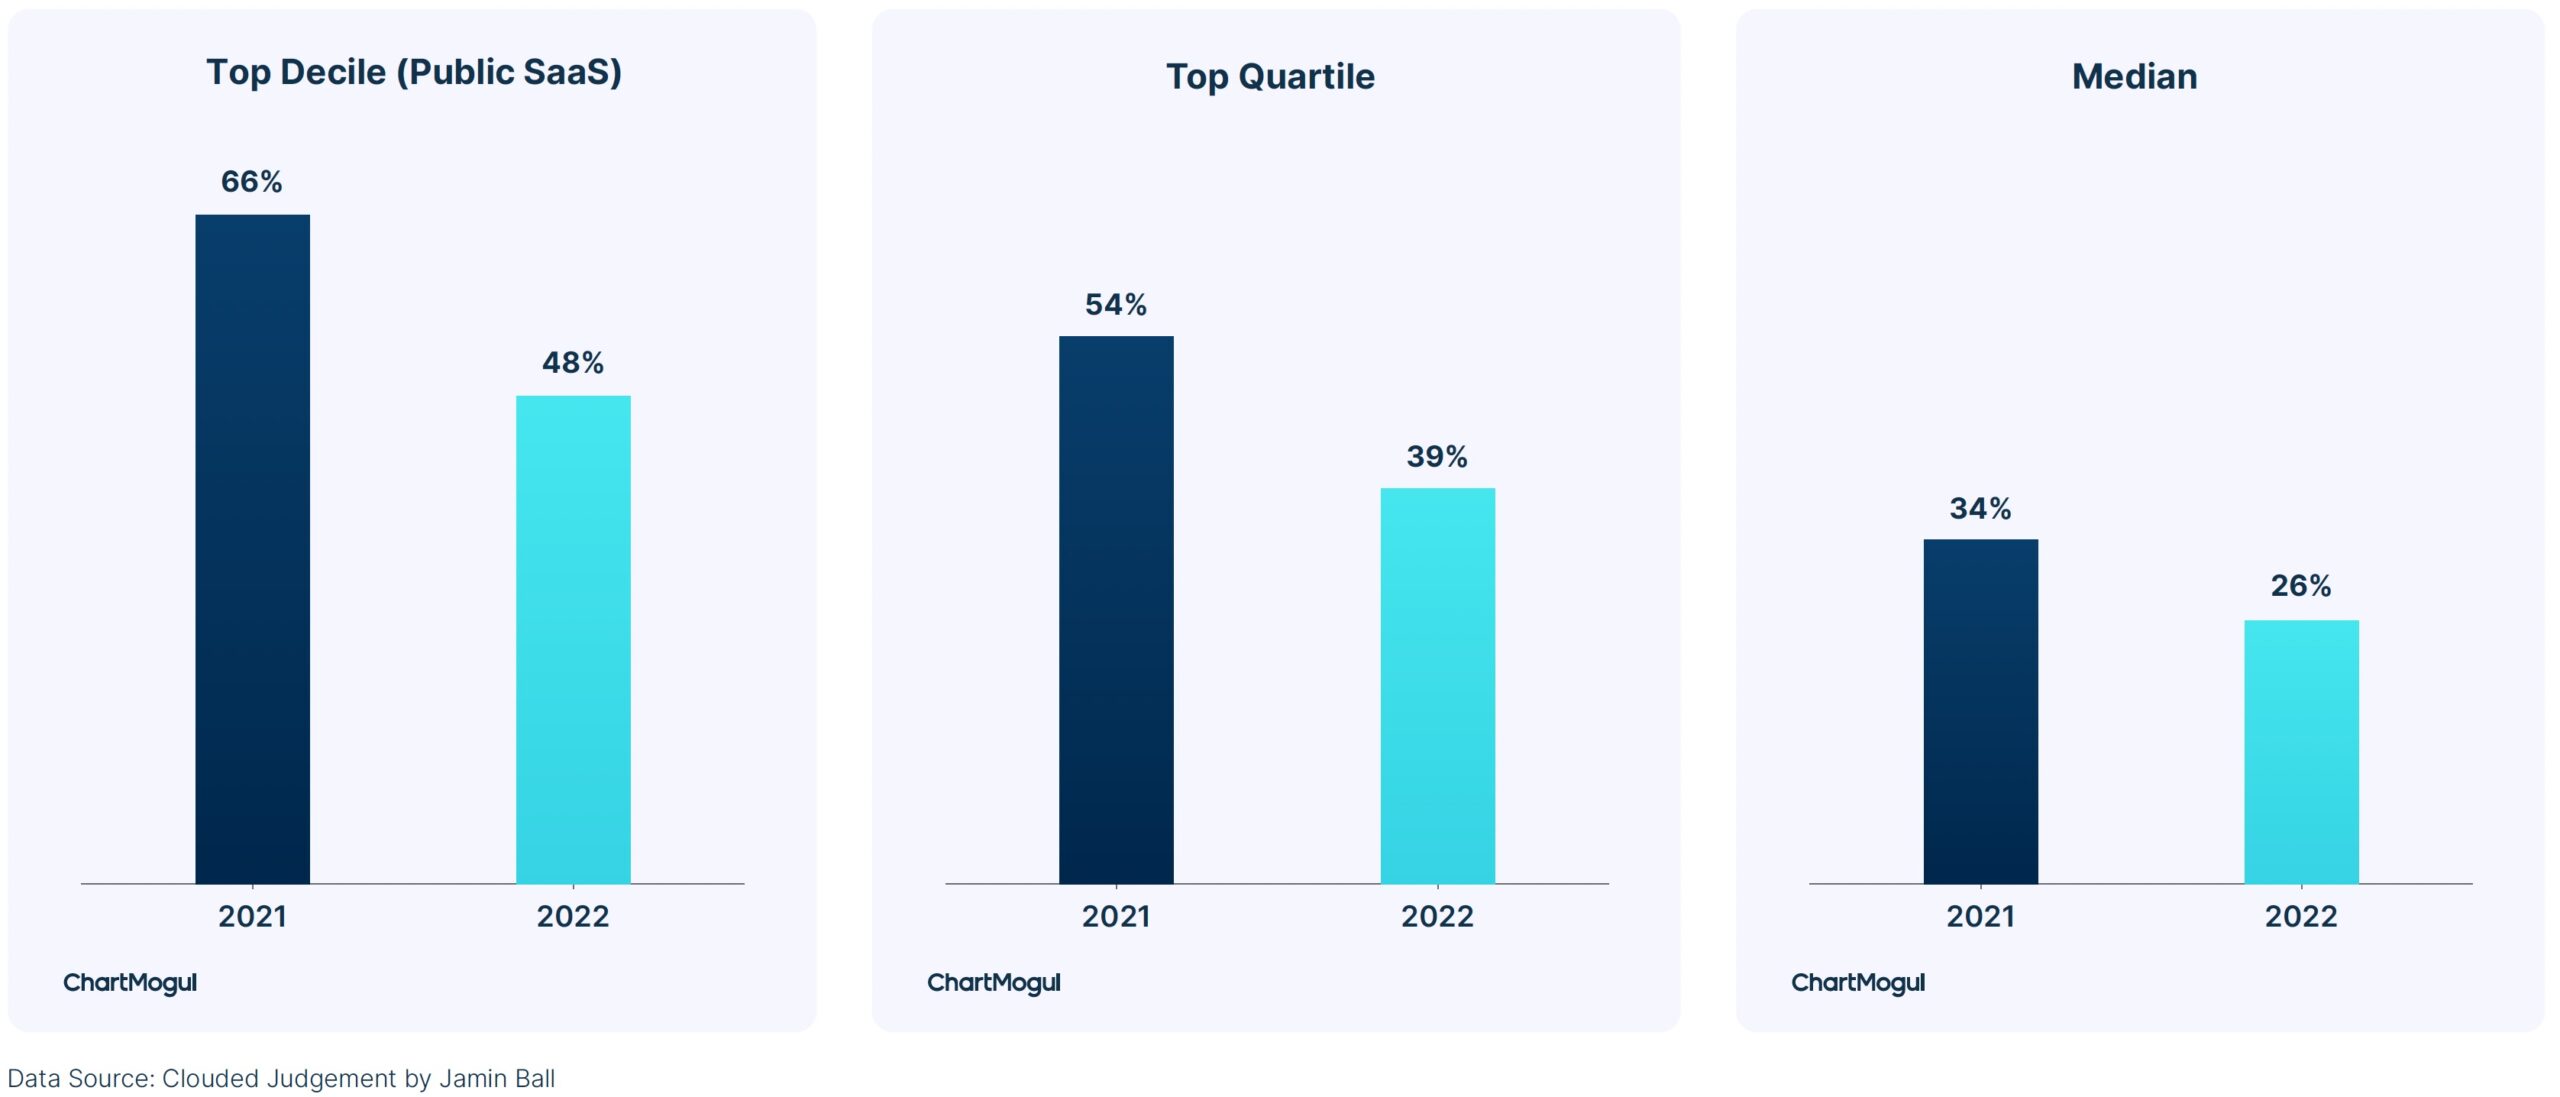 Public SaaS Growth Rates in 2021 and 2022 showing growth is slowing down